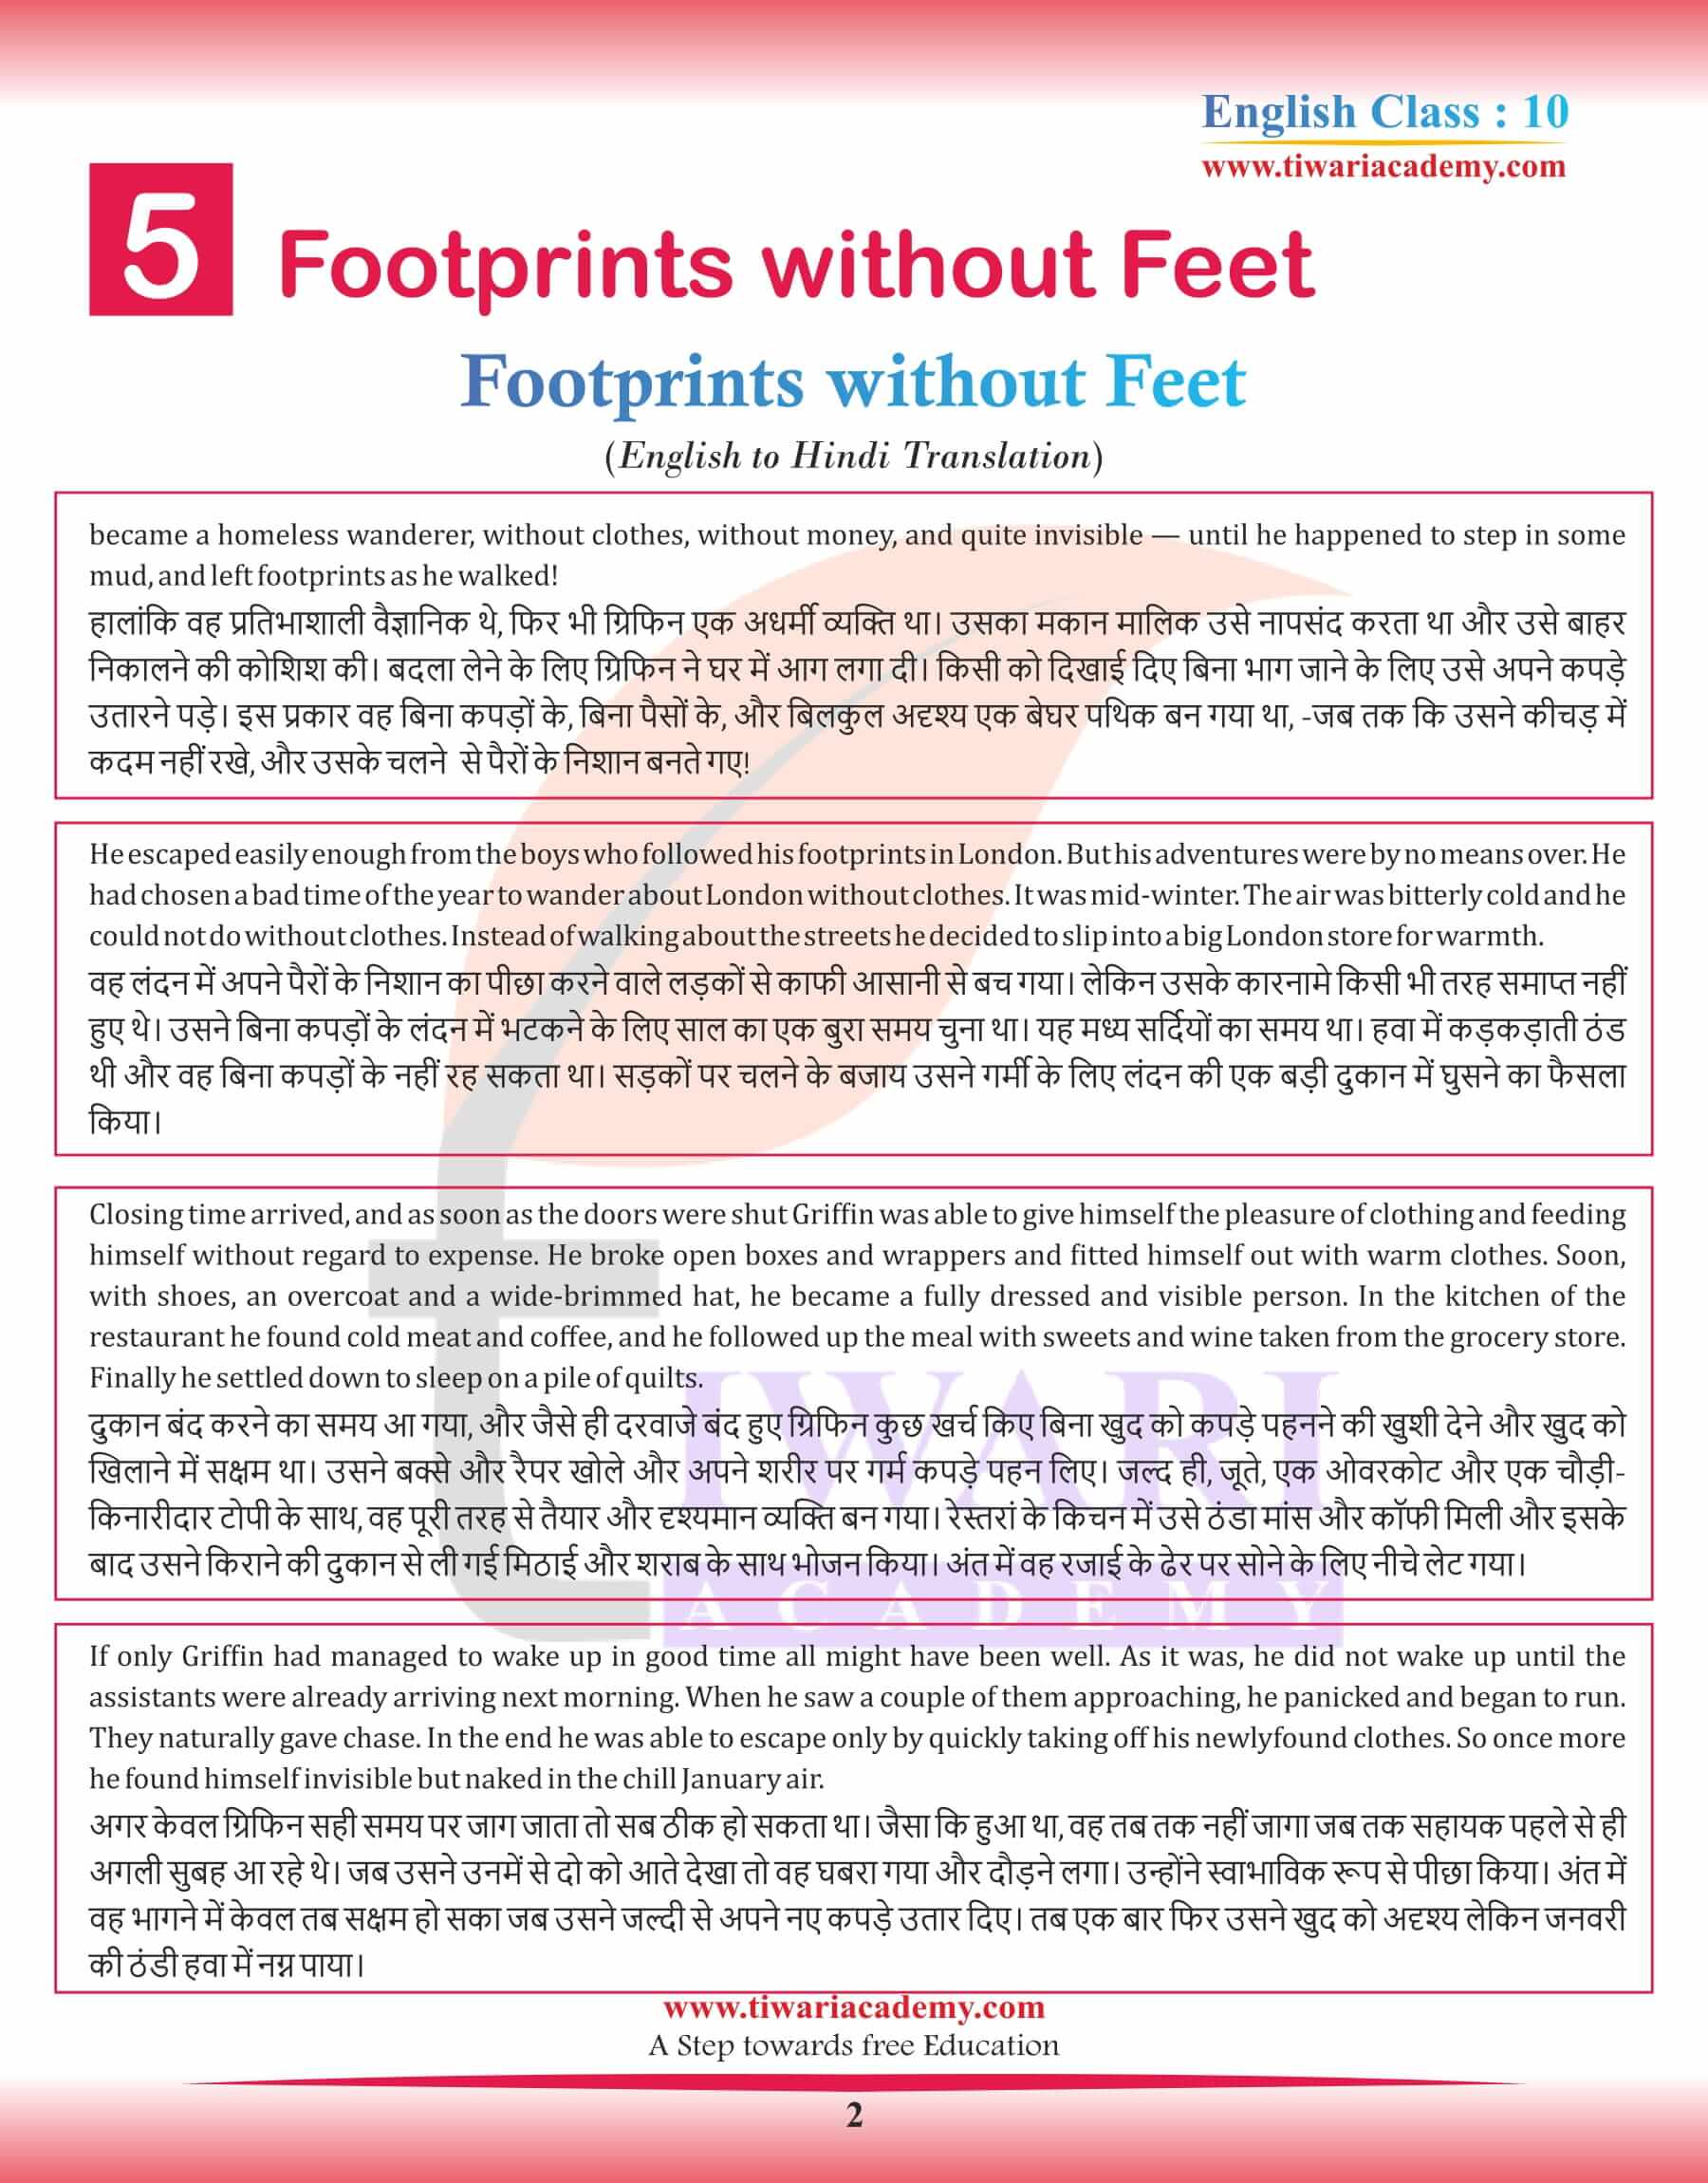 Class 10 English Supplementary Chapter 5 Footprints without Feet in Hindi